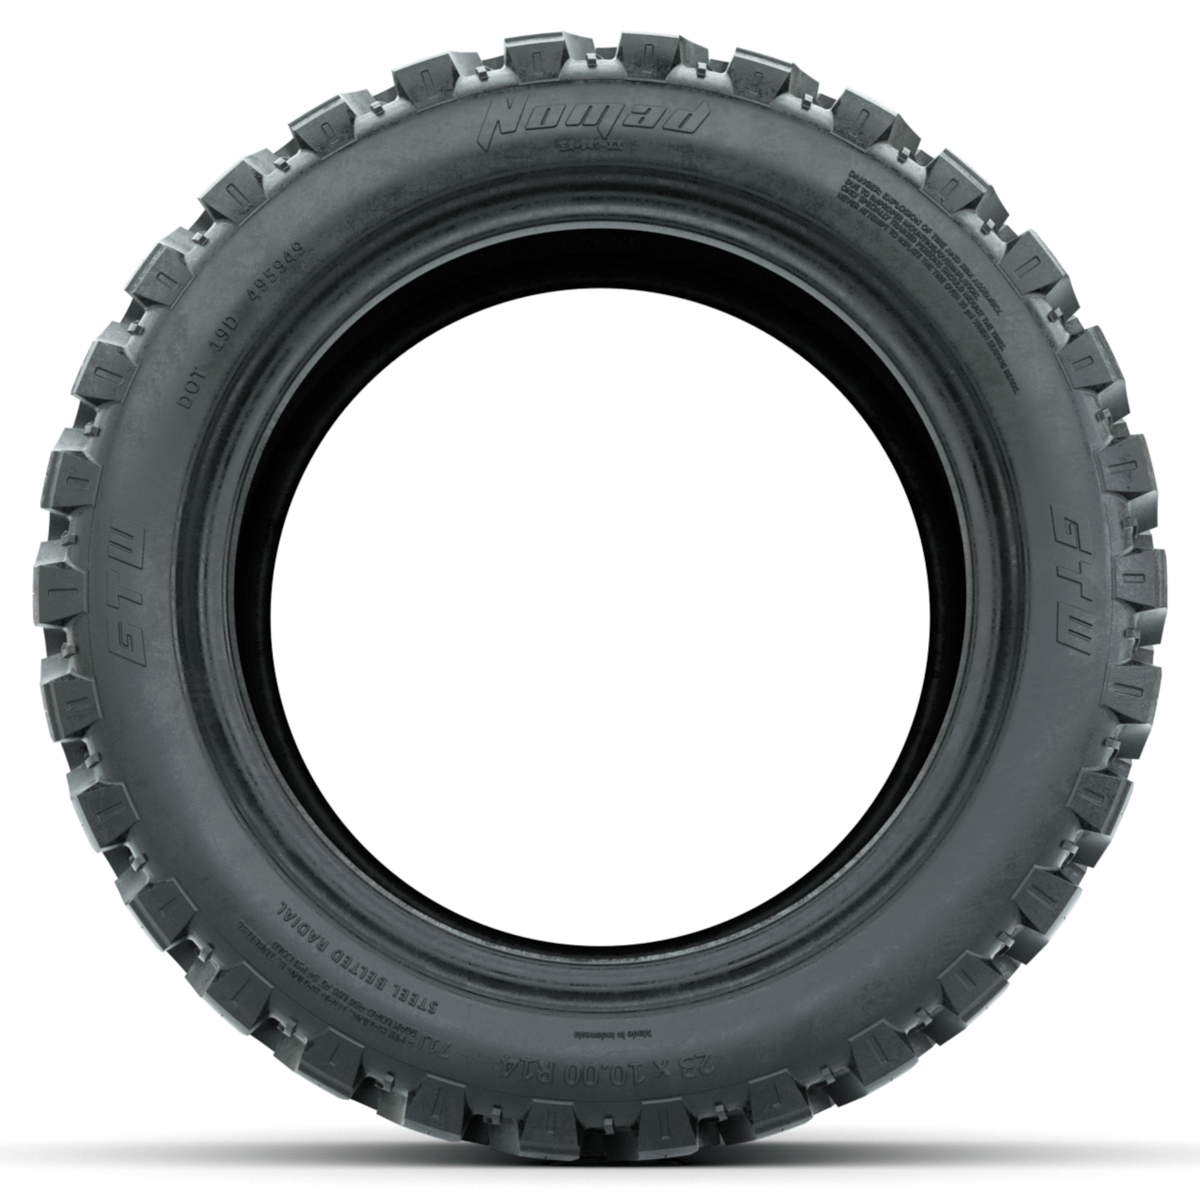 23x10-R14 GTW&reg; Nomad Steel Belted Radial All Terrain Tire